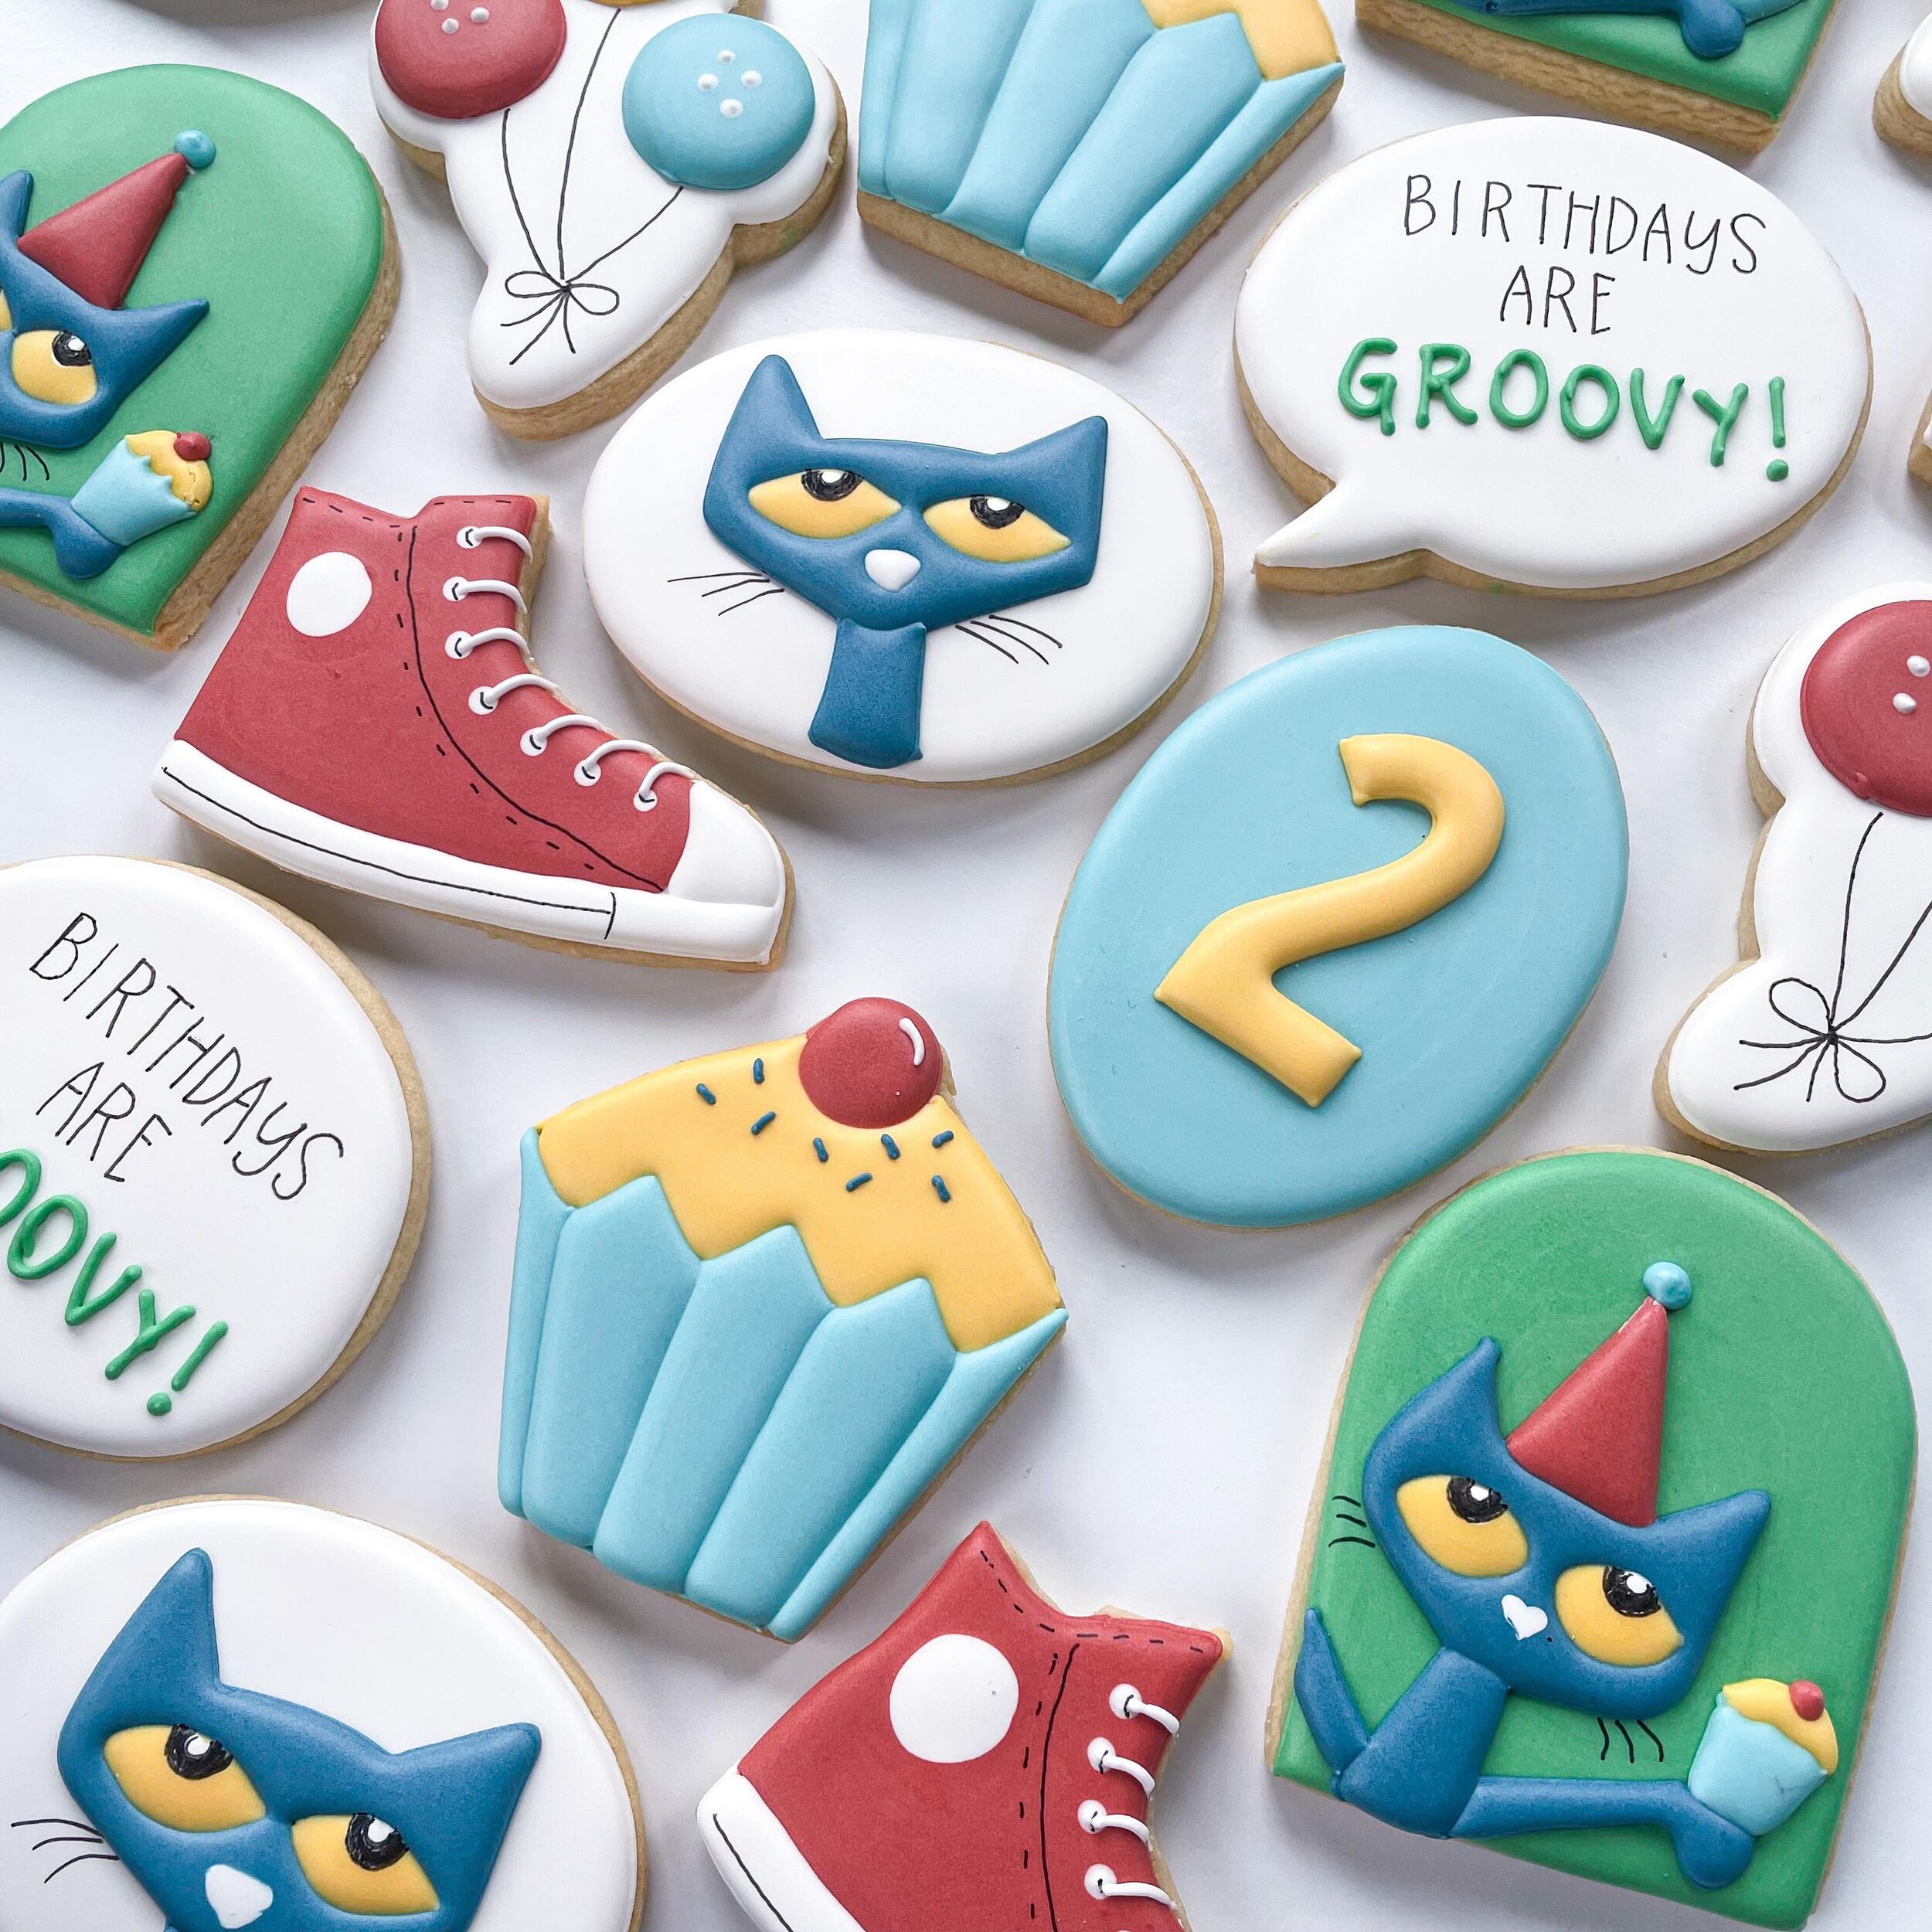 I don&rsquo;t make a lot of character cookies but will always make an exception for Pete the Cat 🤍. 

#petethecatcookies #birthdaycookies #customcookies